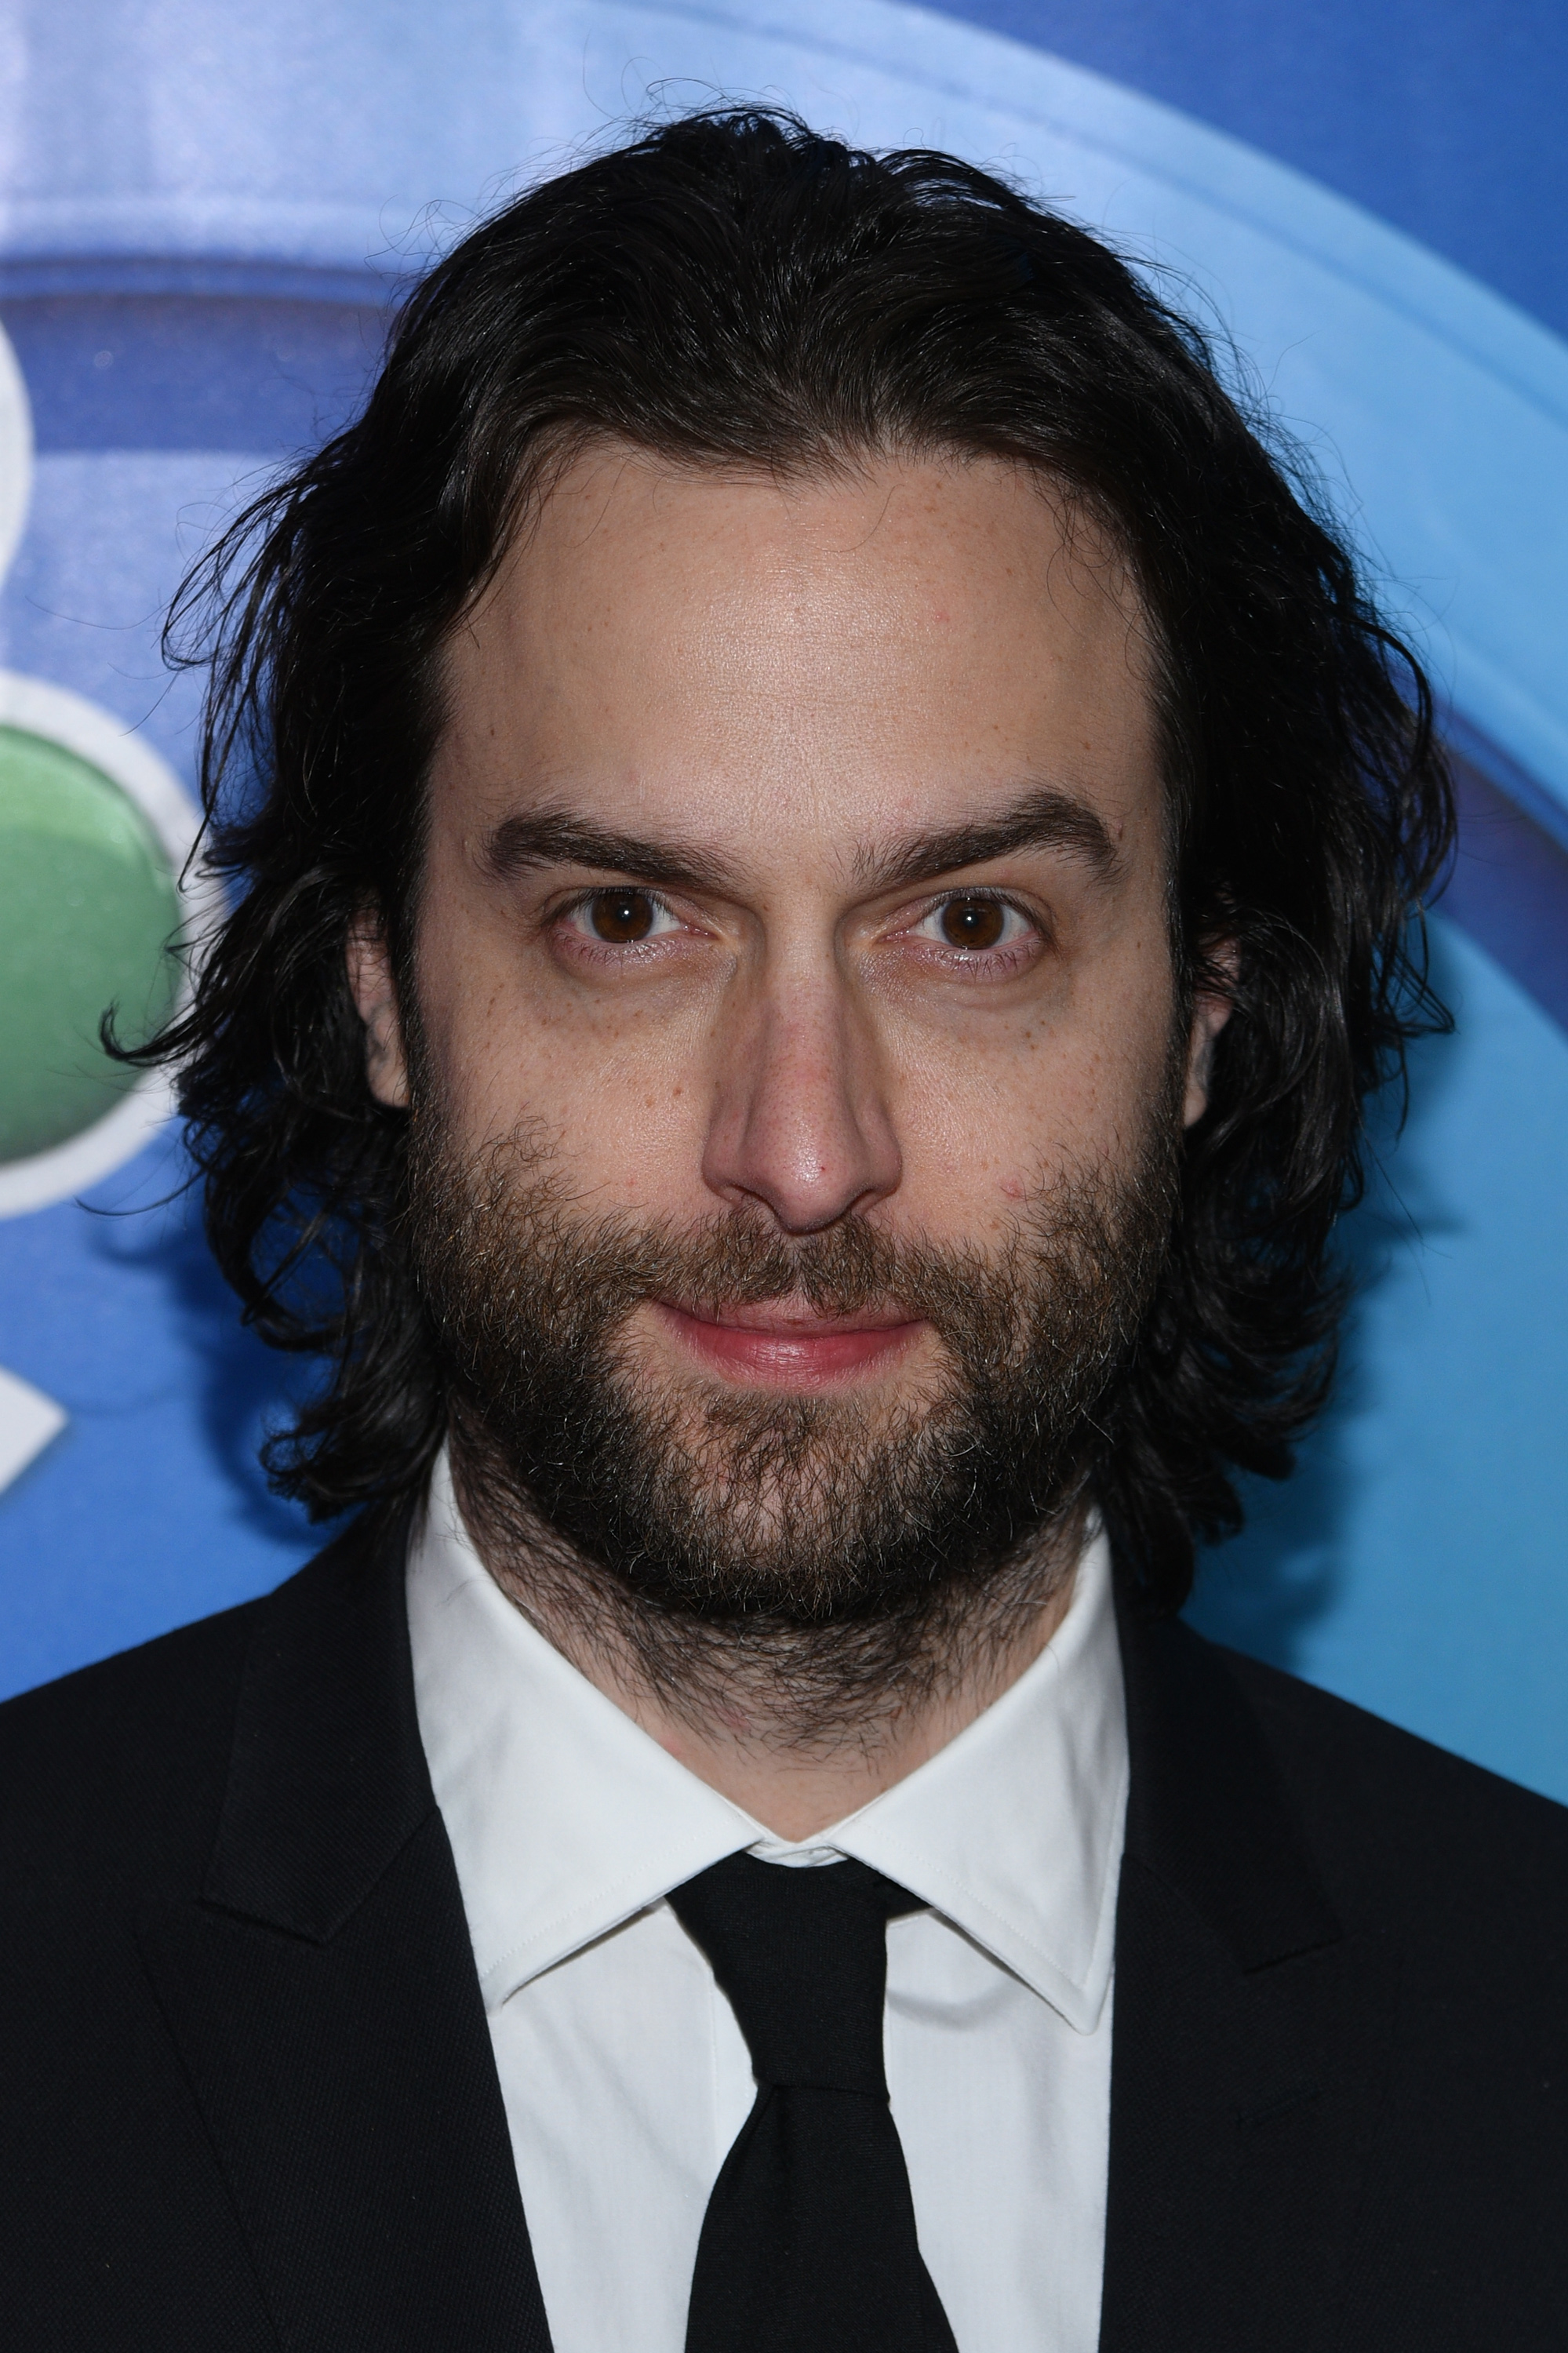 Chris D'Elia attends the 2015 NBC Upfront Presentation Red Carpet Event at Radio City Music Hall on May 11, 2015 in New York City | Source: Getty Images